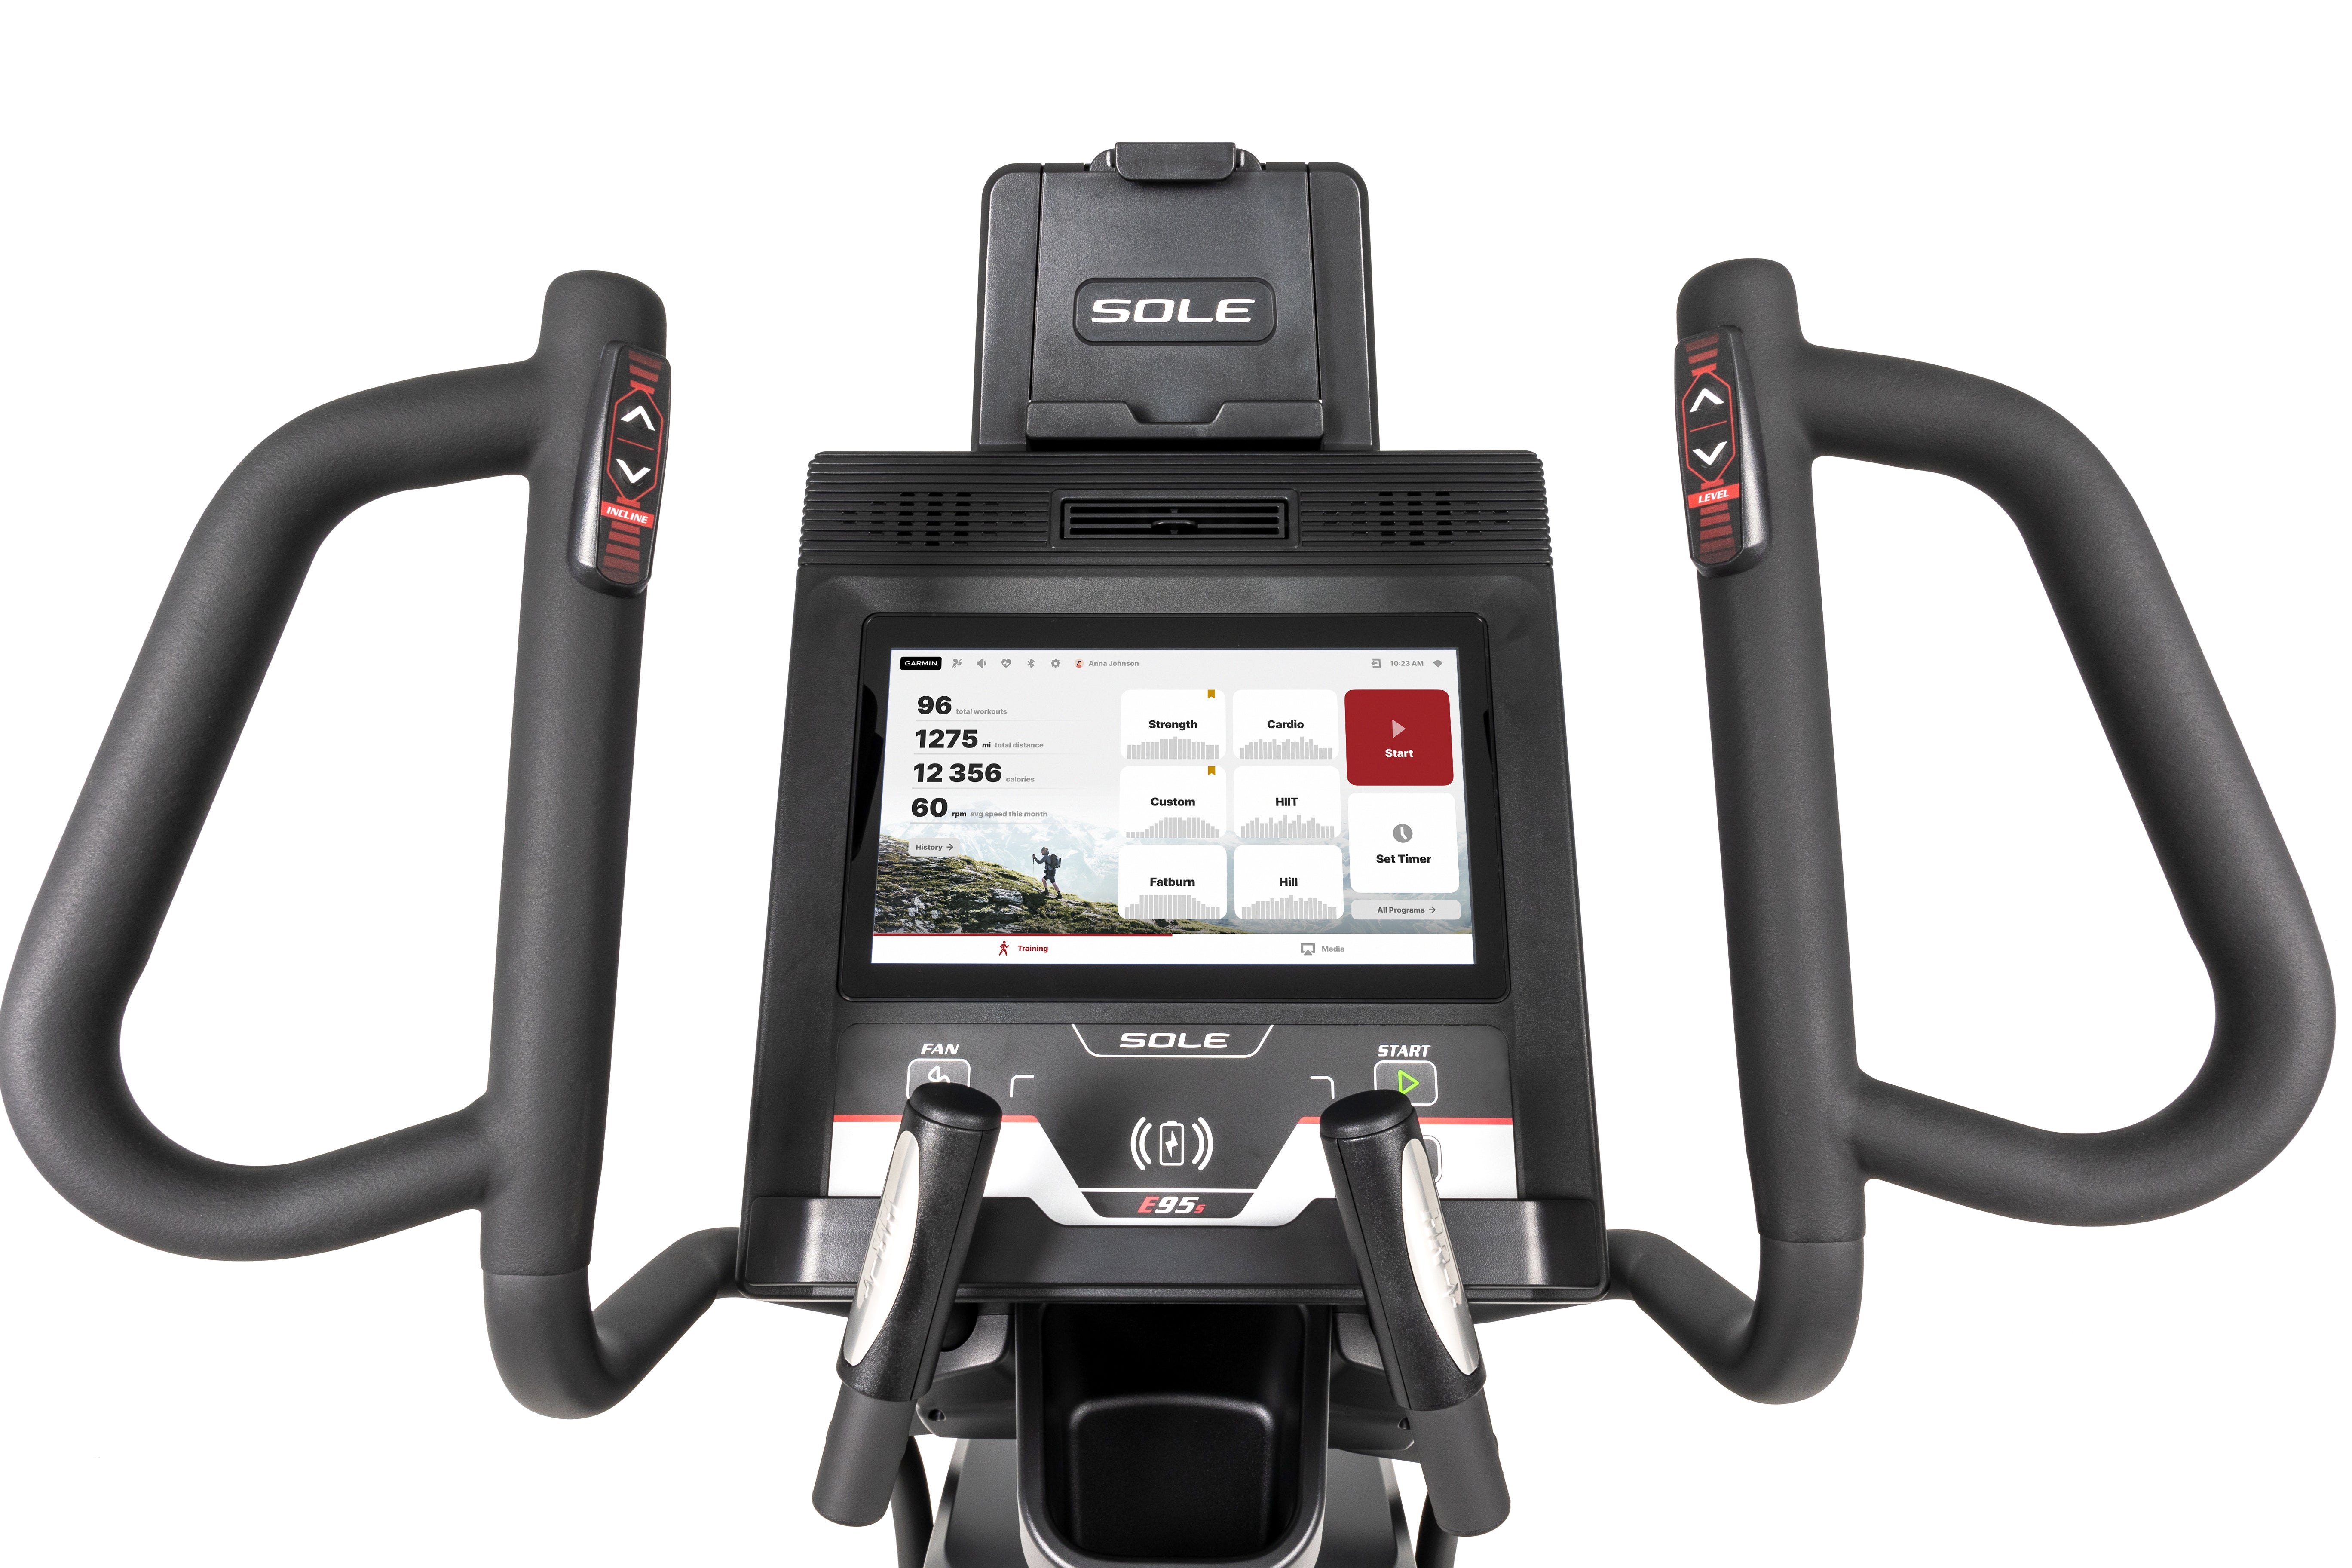 Close-up view of the Sole E95S elliptical machine's upper console, displaying a digital screen with workout metrics, adjustable handlebars with heart rate sensors, and dedicated buttons for easy navigation.